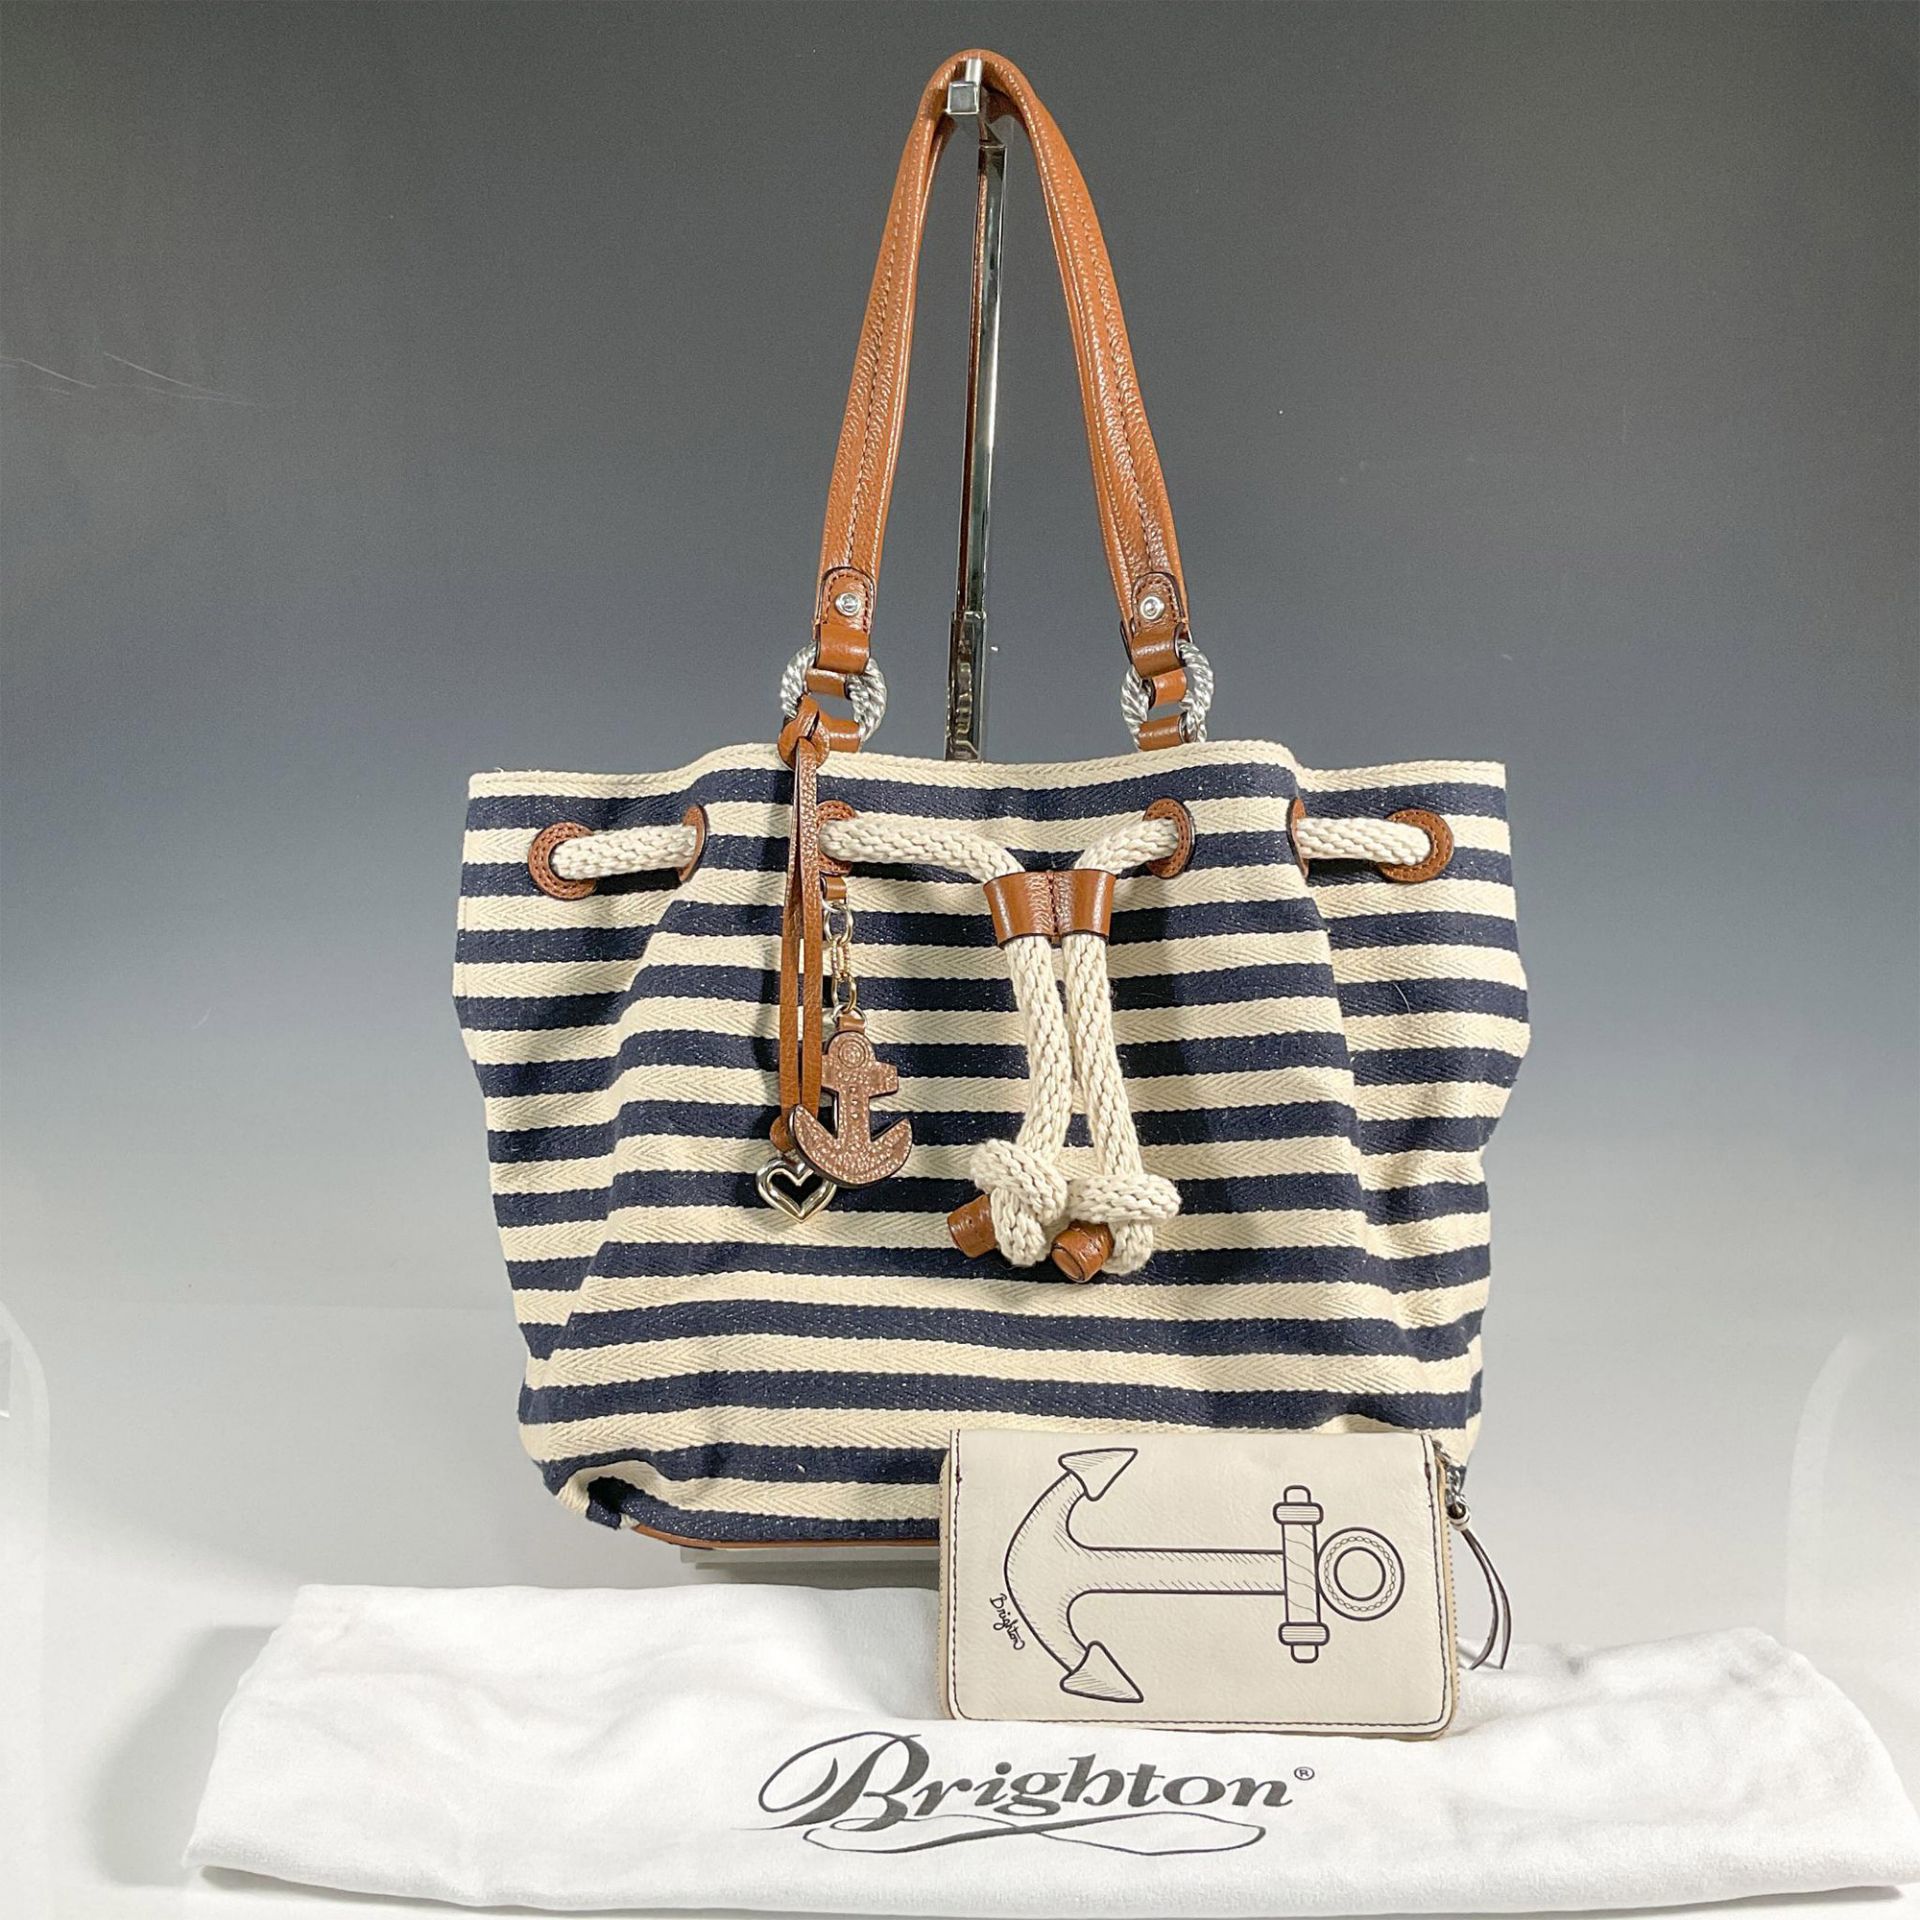 2pc Brighton Canvas Handbag and Leather Wallet, Nautical - Image 3 of 4